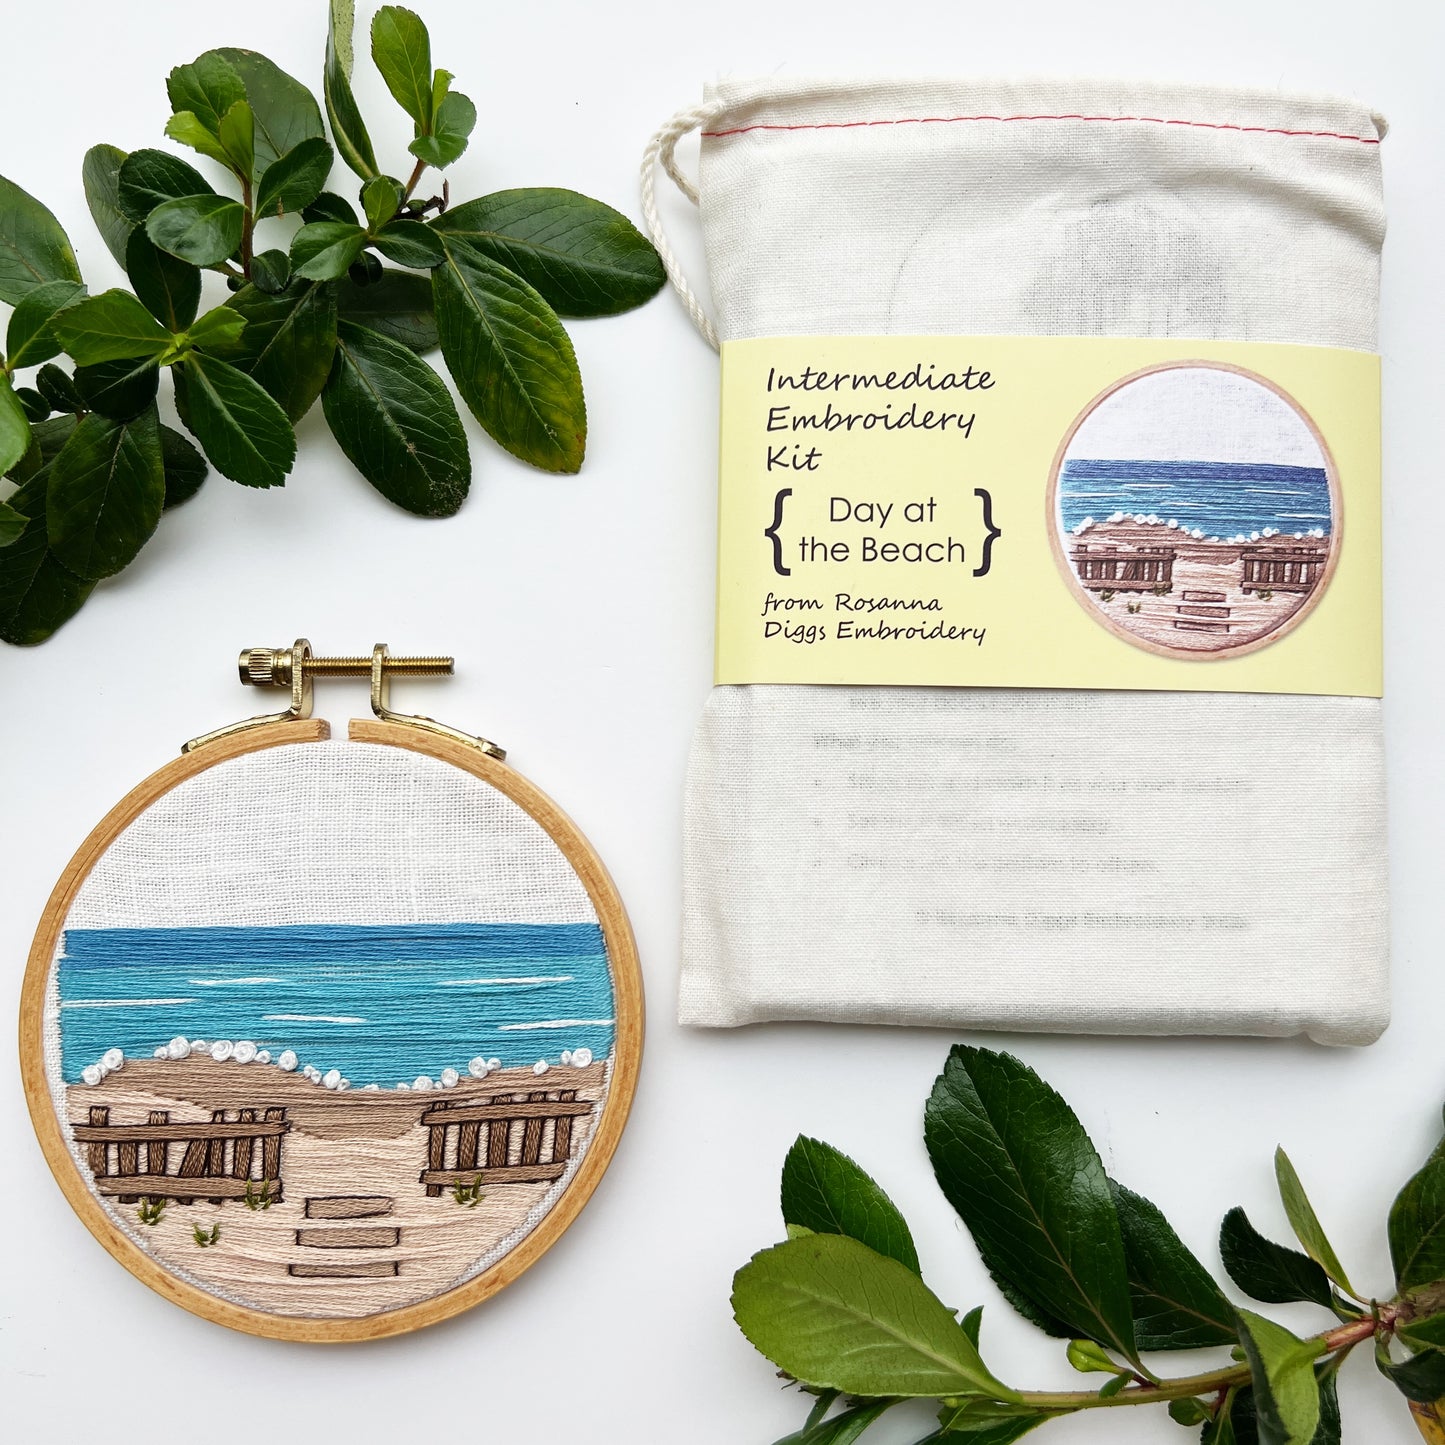 A Day at the Beach Intermediate Embroidery Kit